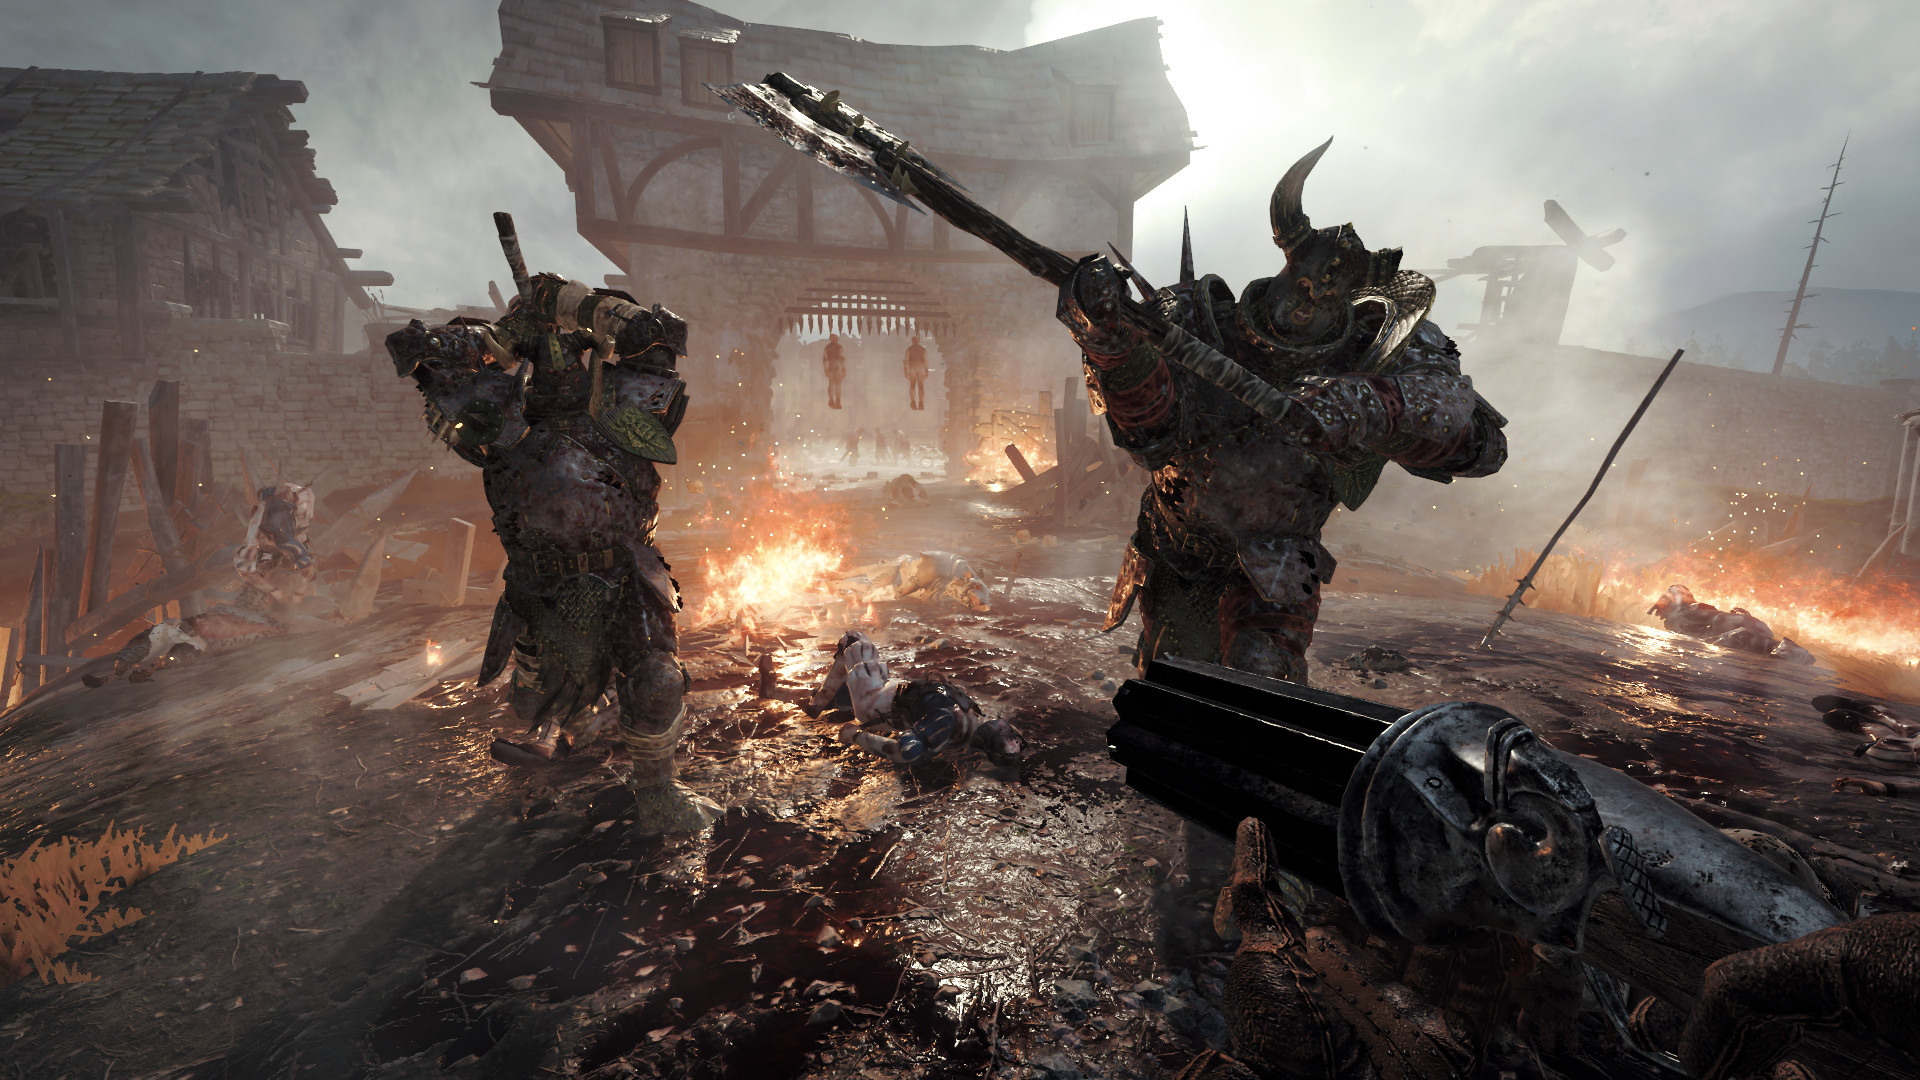 Warhammer: Vermintide 2 for $18/£13.79 this week | PC